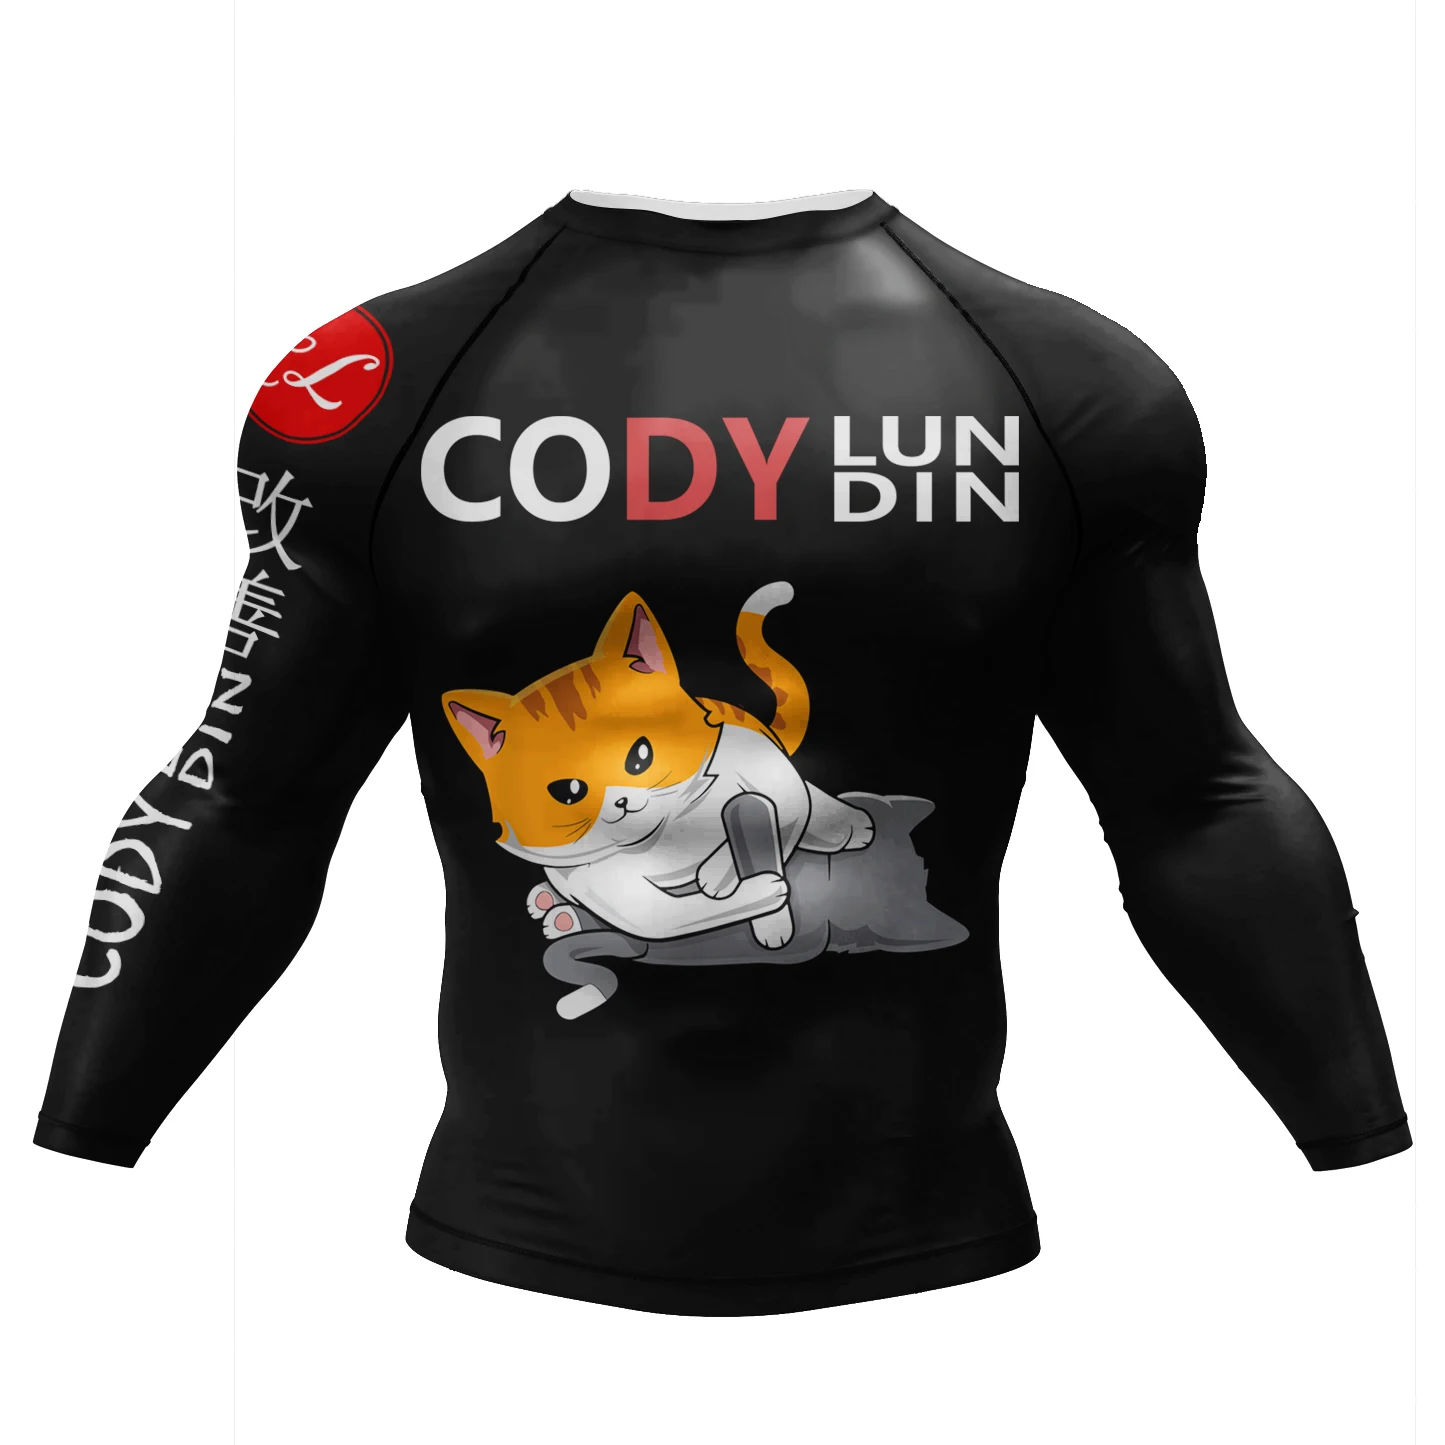 

Men Graphic Tight Sports Casual t shirts Cody Lundin Long Sleeve Gym Bodybuilding Clothes Polyester Bjj Rashguard Boxing Jersey